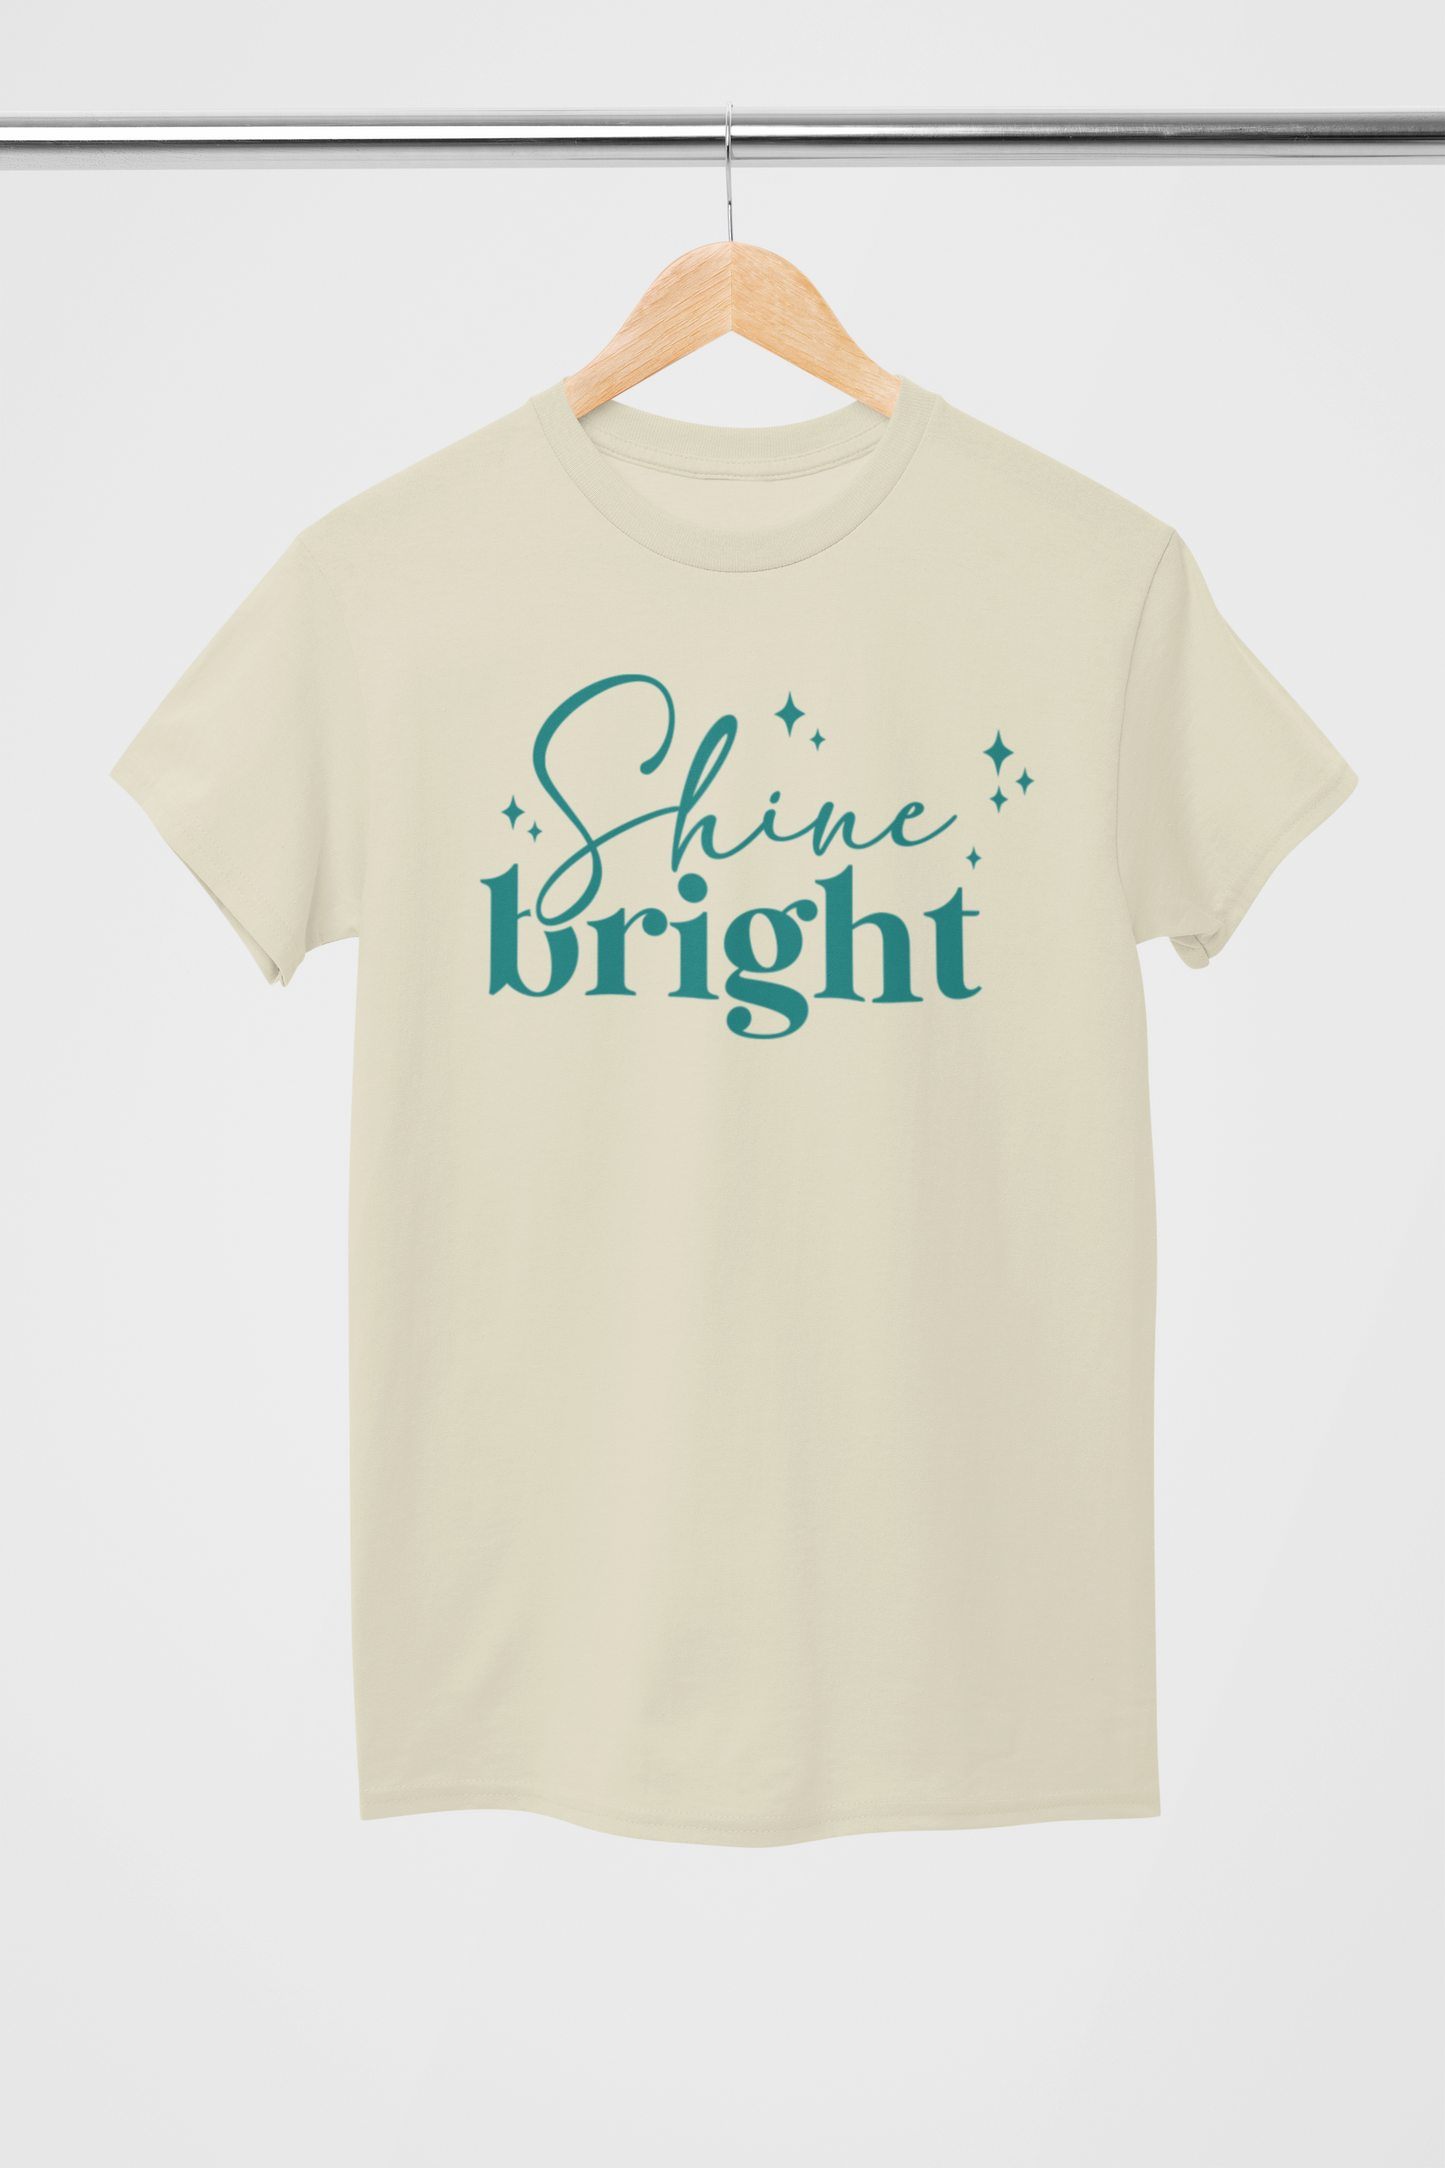 Shine Bright T-Shirt NEW Release (Swag)